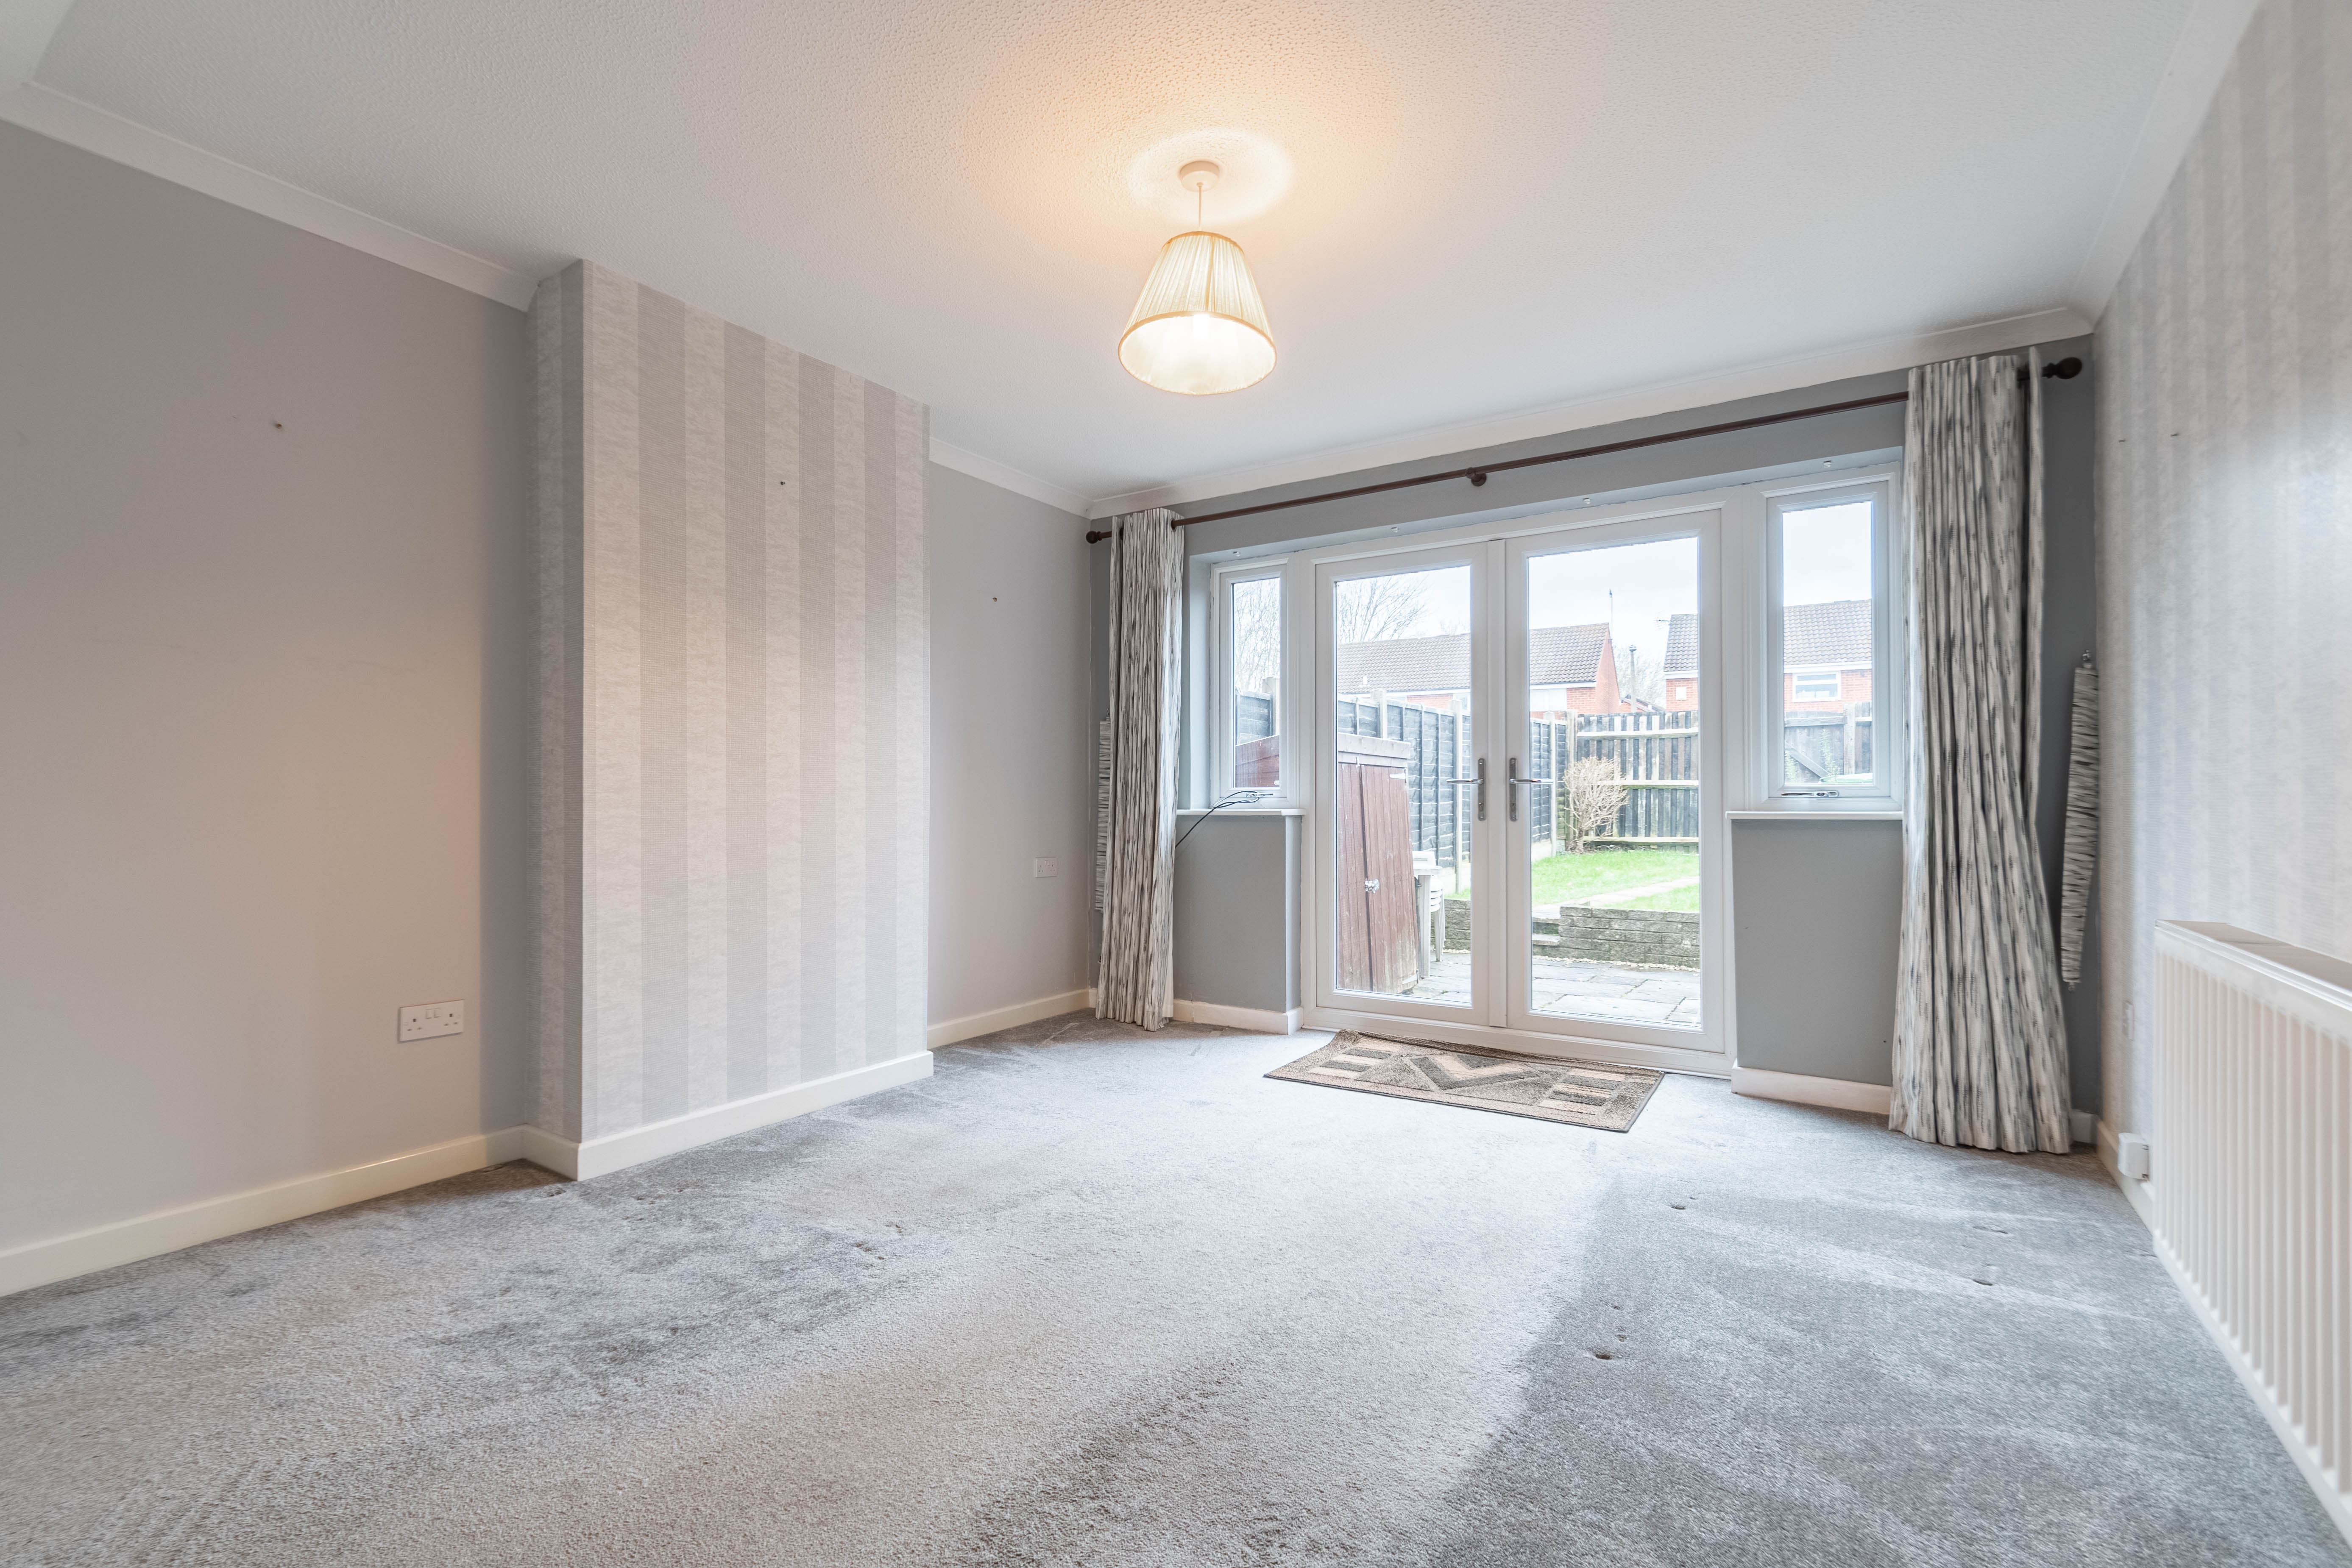 2 bed house for sale in Abbotswood Close, Winyates Green 4